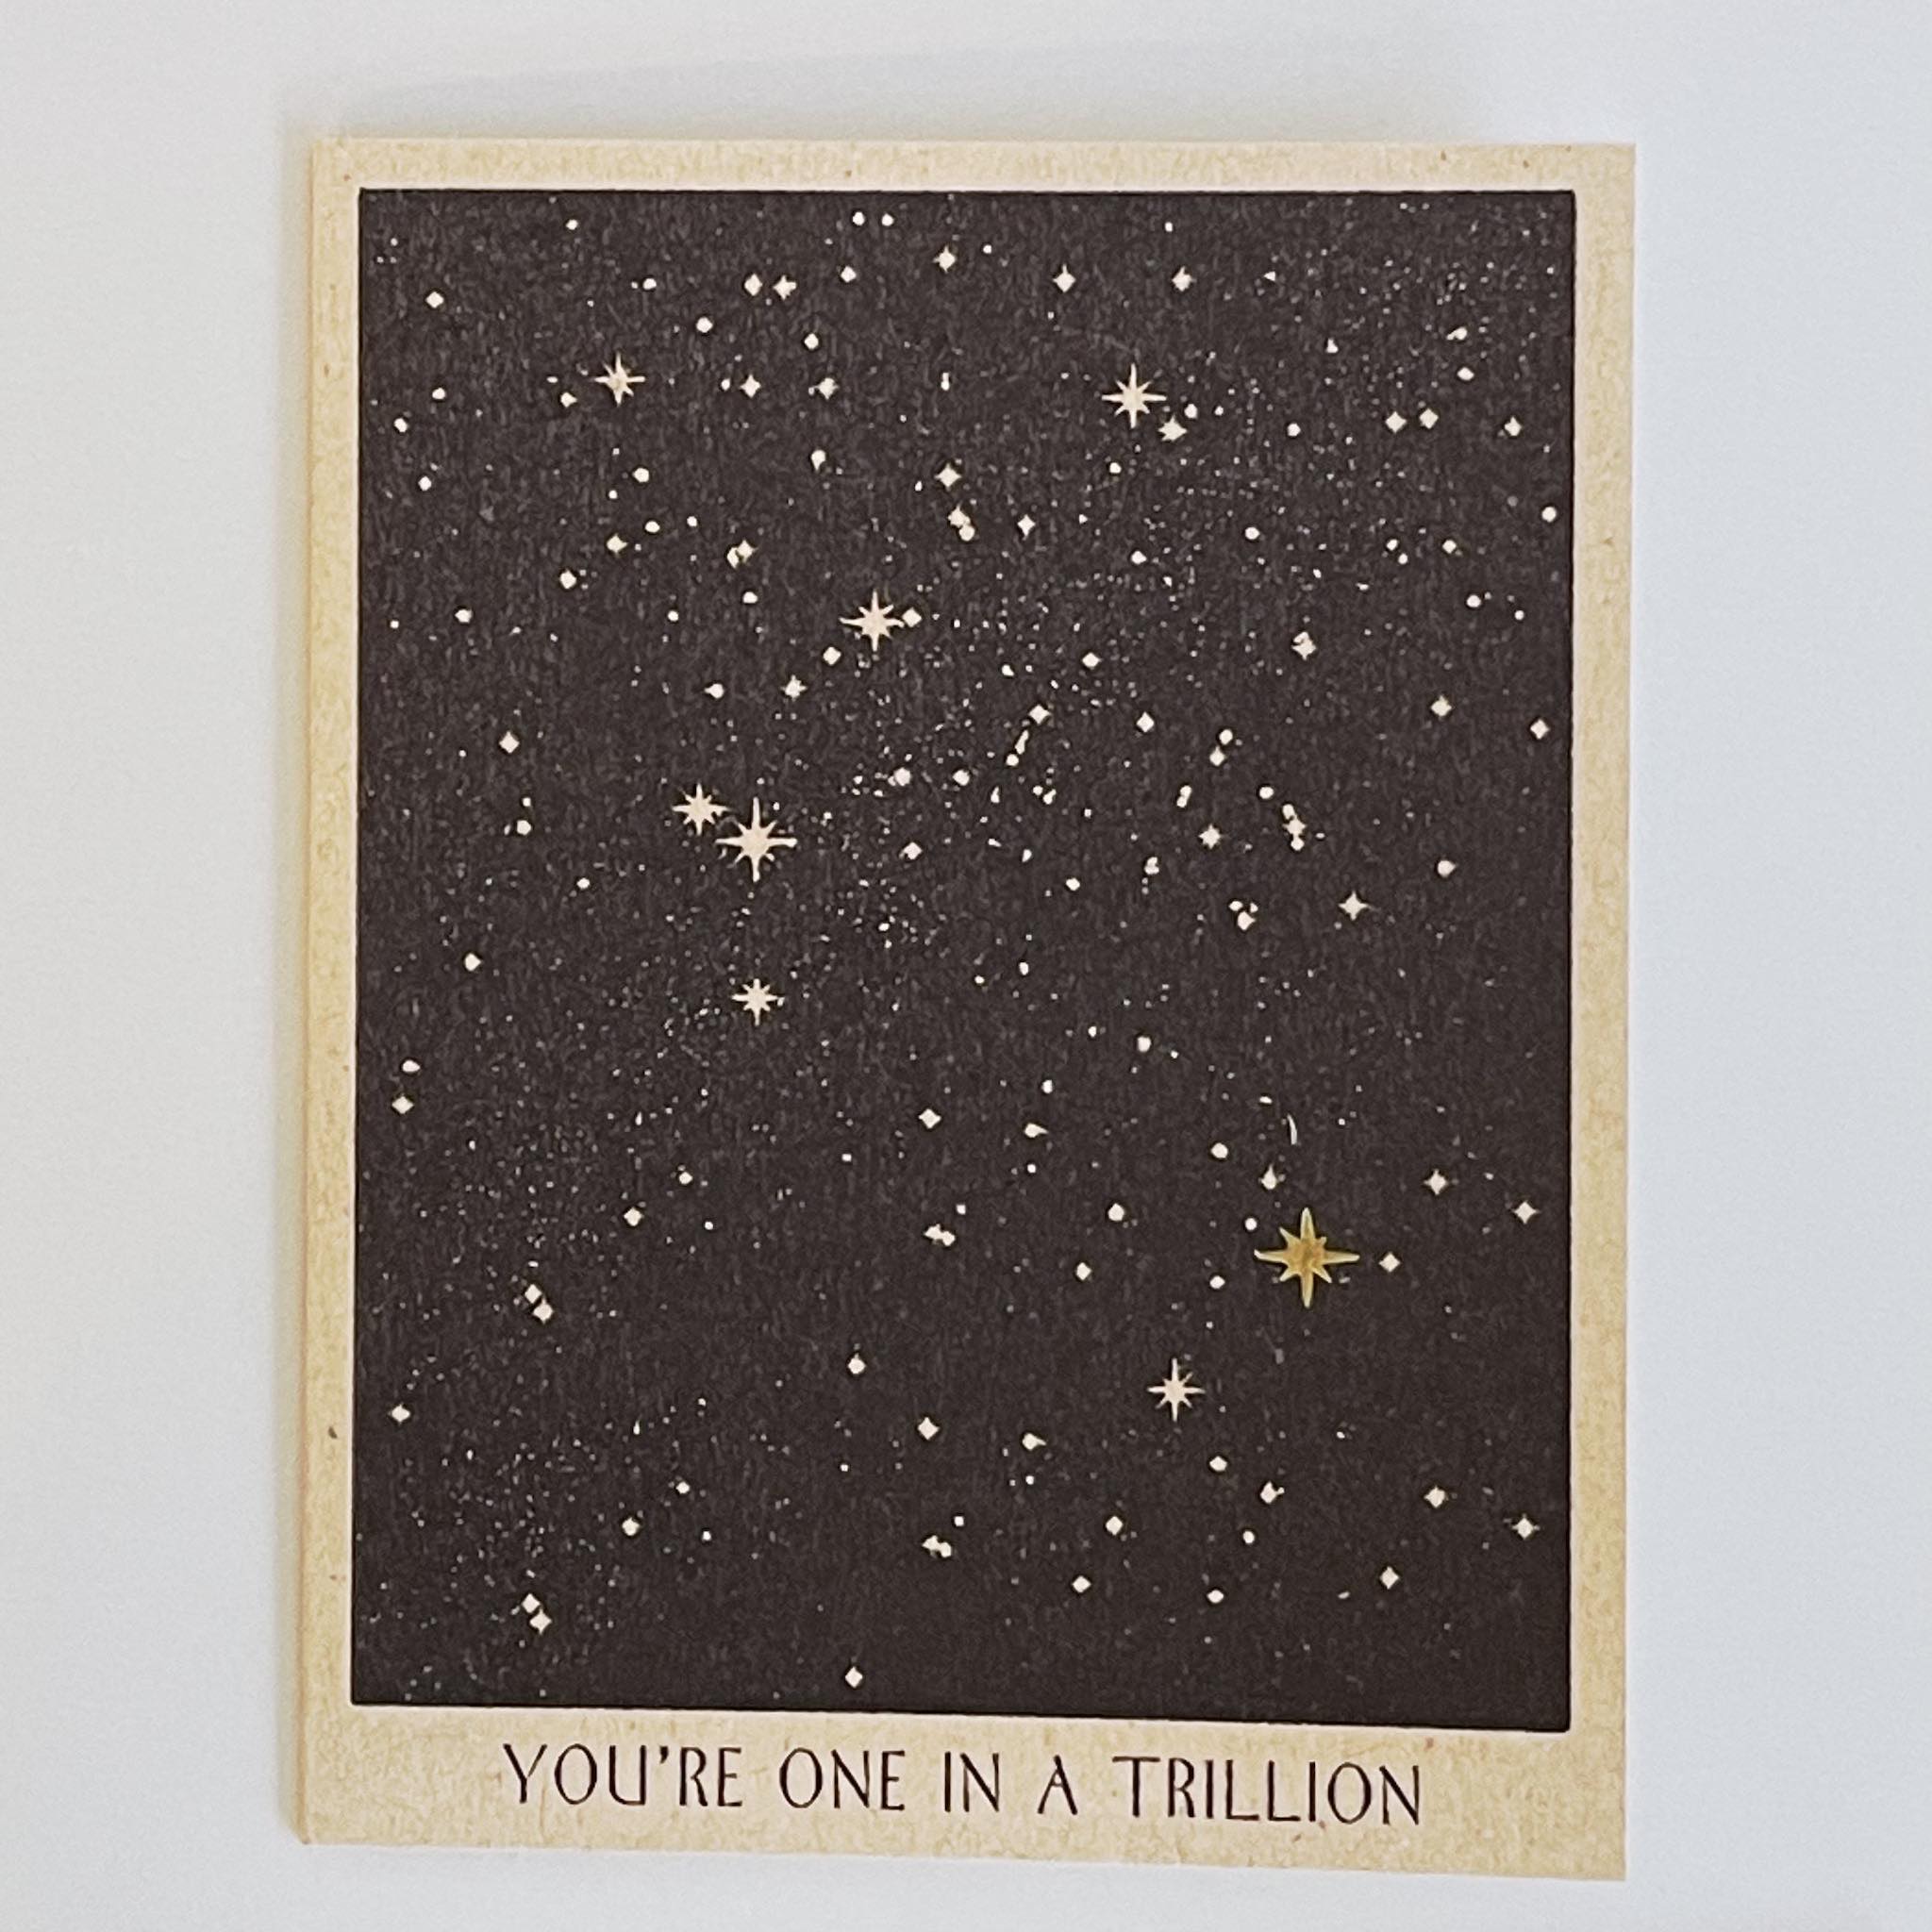 You're One in a Trillion Card